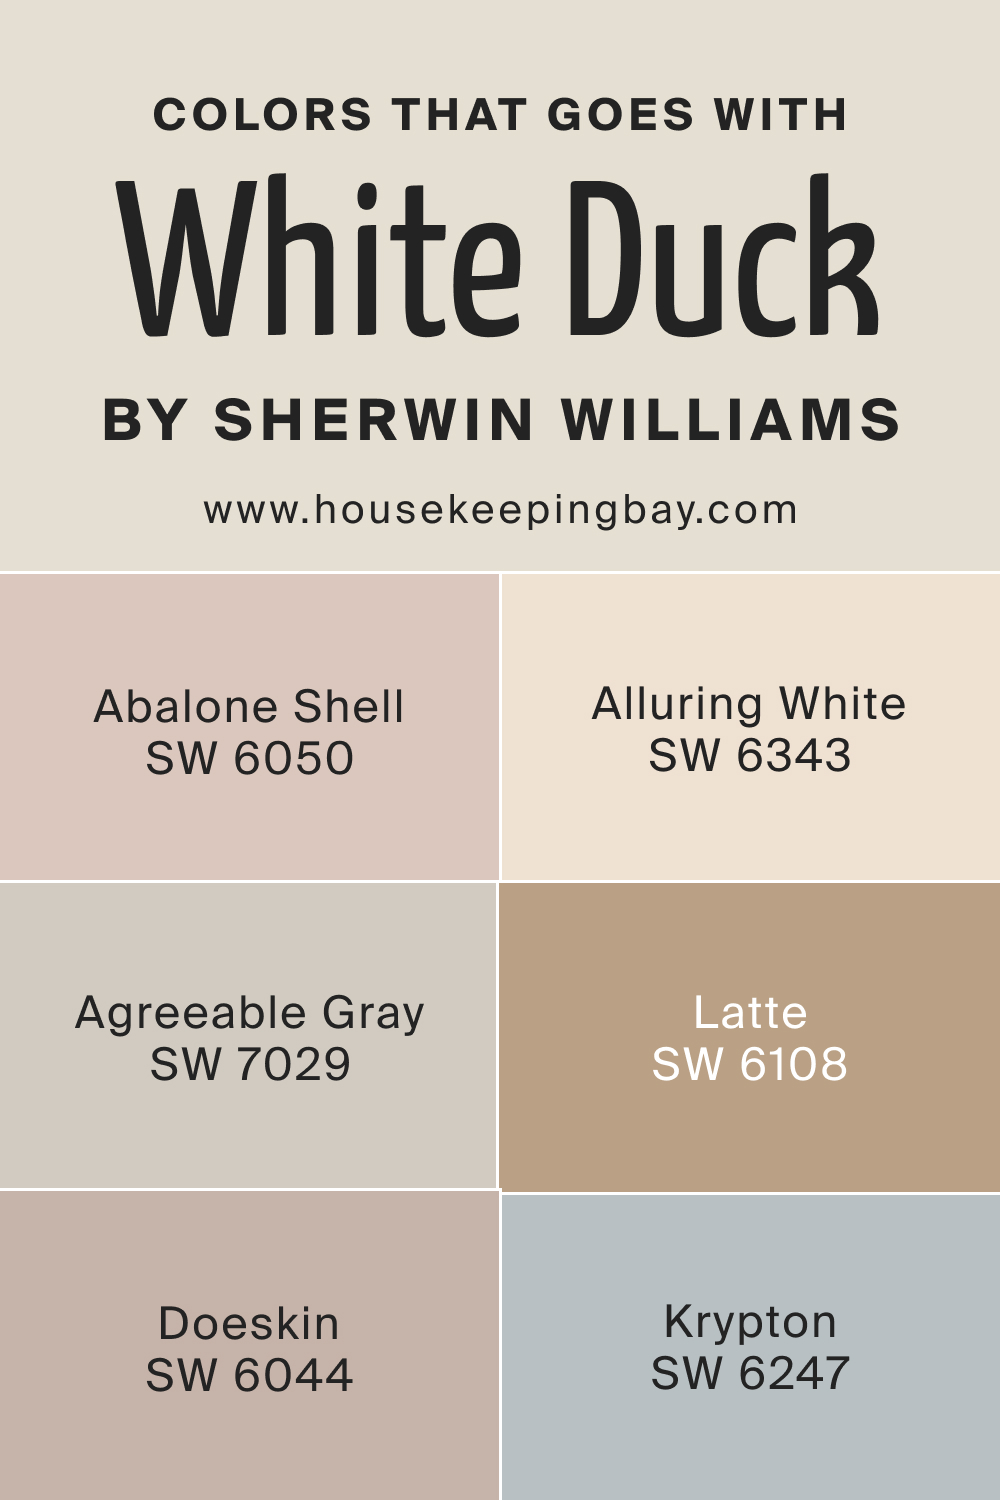 Colors that goes with SW White Duck by Sherwin Williams